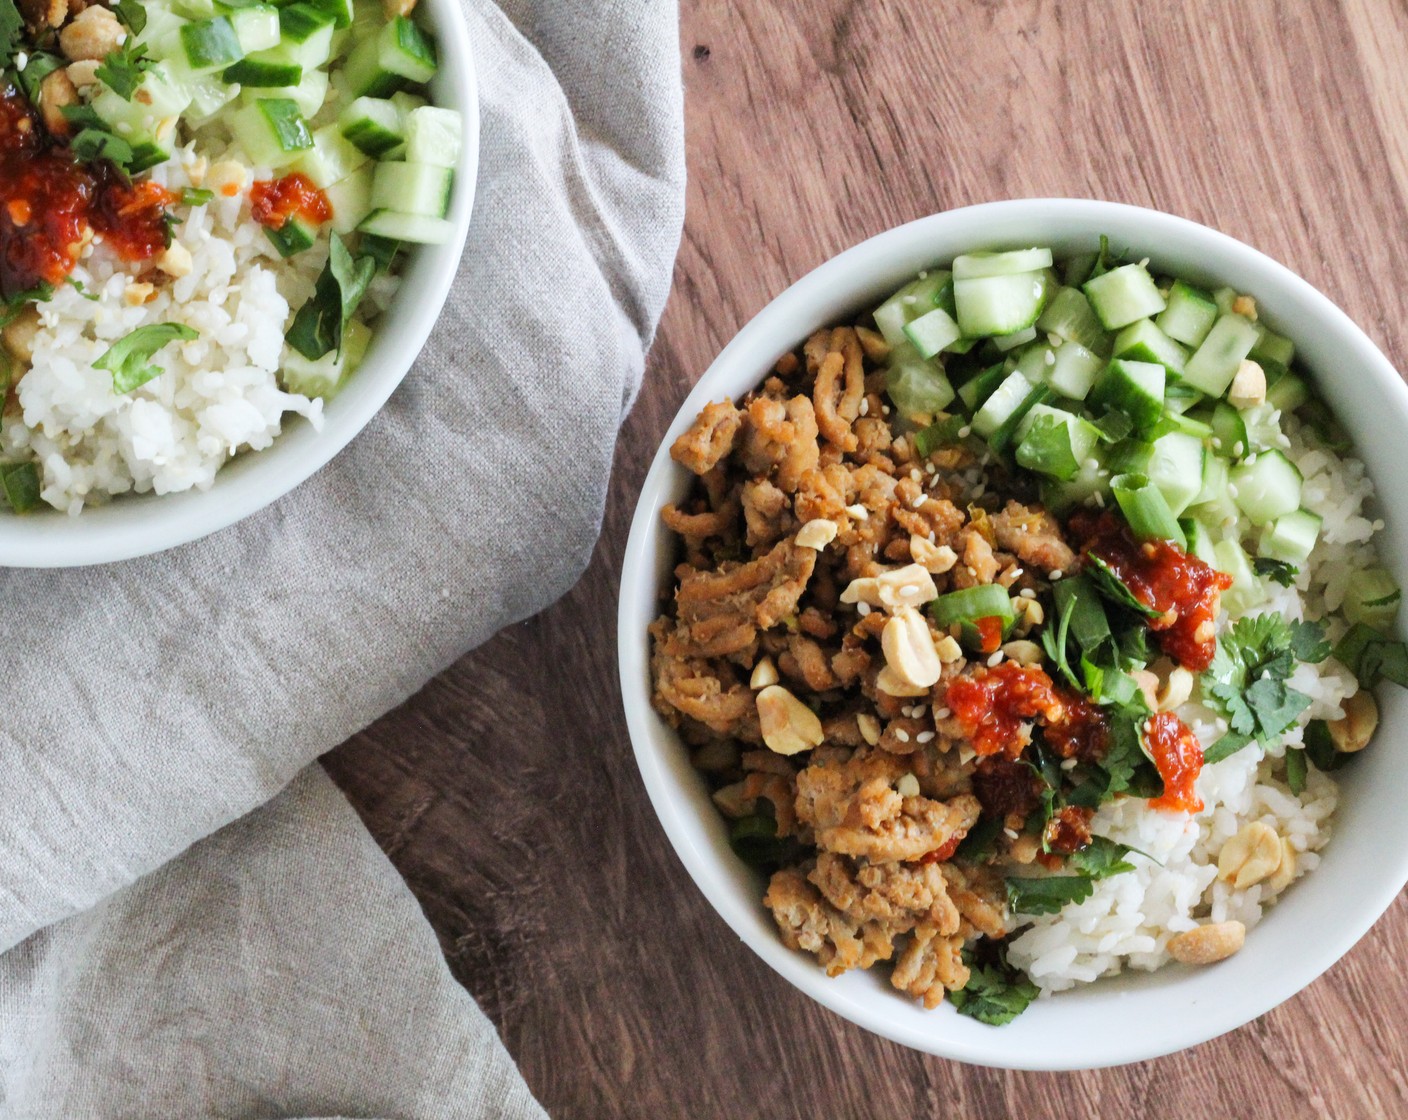 step 6 To serve, divide rice into bowls and top with the sweet and spicy chicken. Add Cucumber (1), Peanuts (1/4 cup), sliced green scallions, and Fresh Cilantro (2 Tbsp).